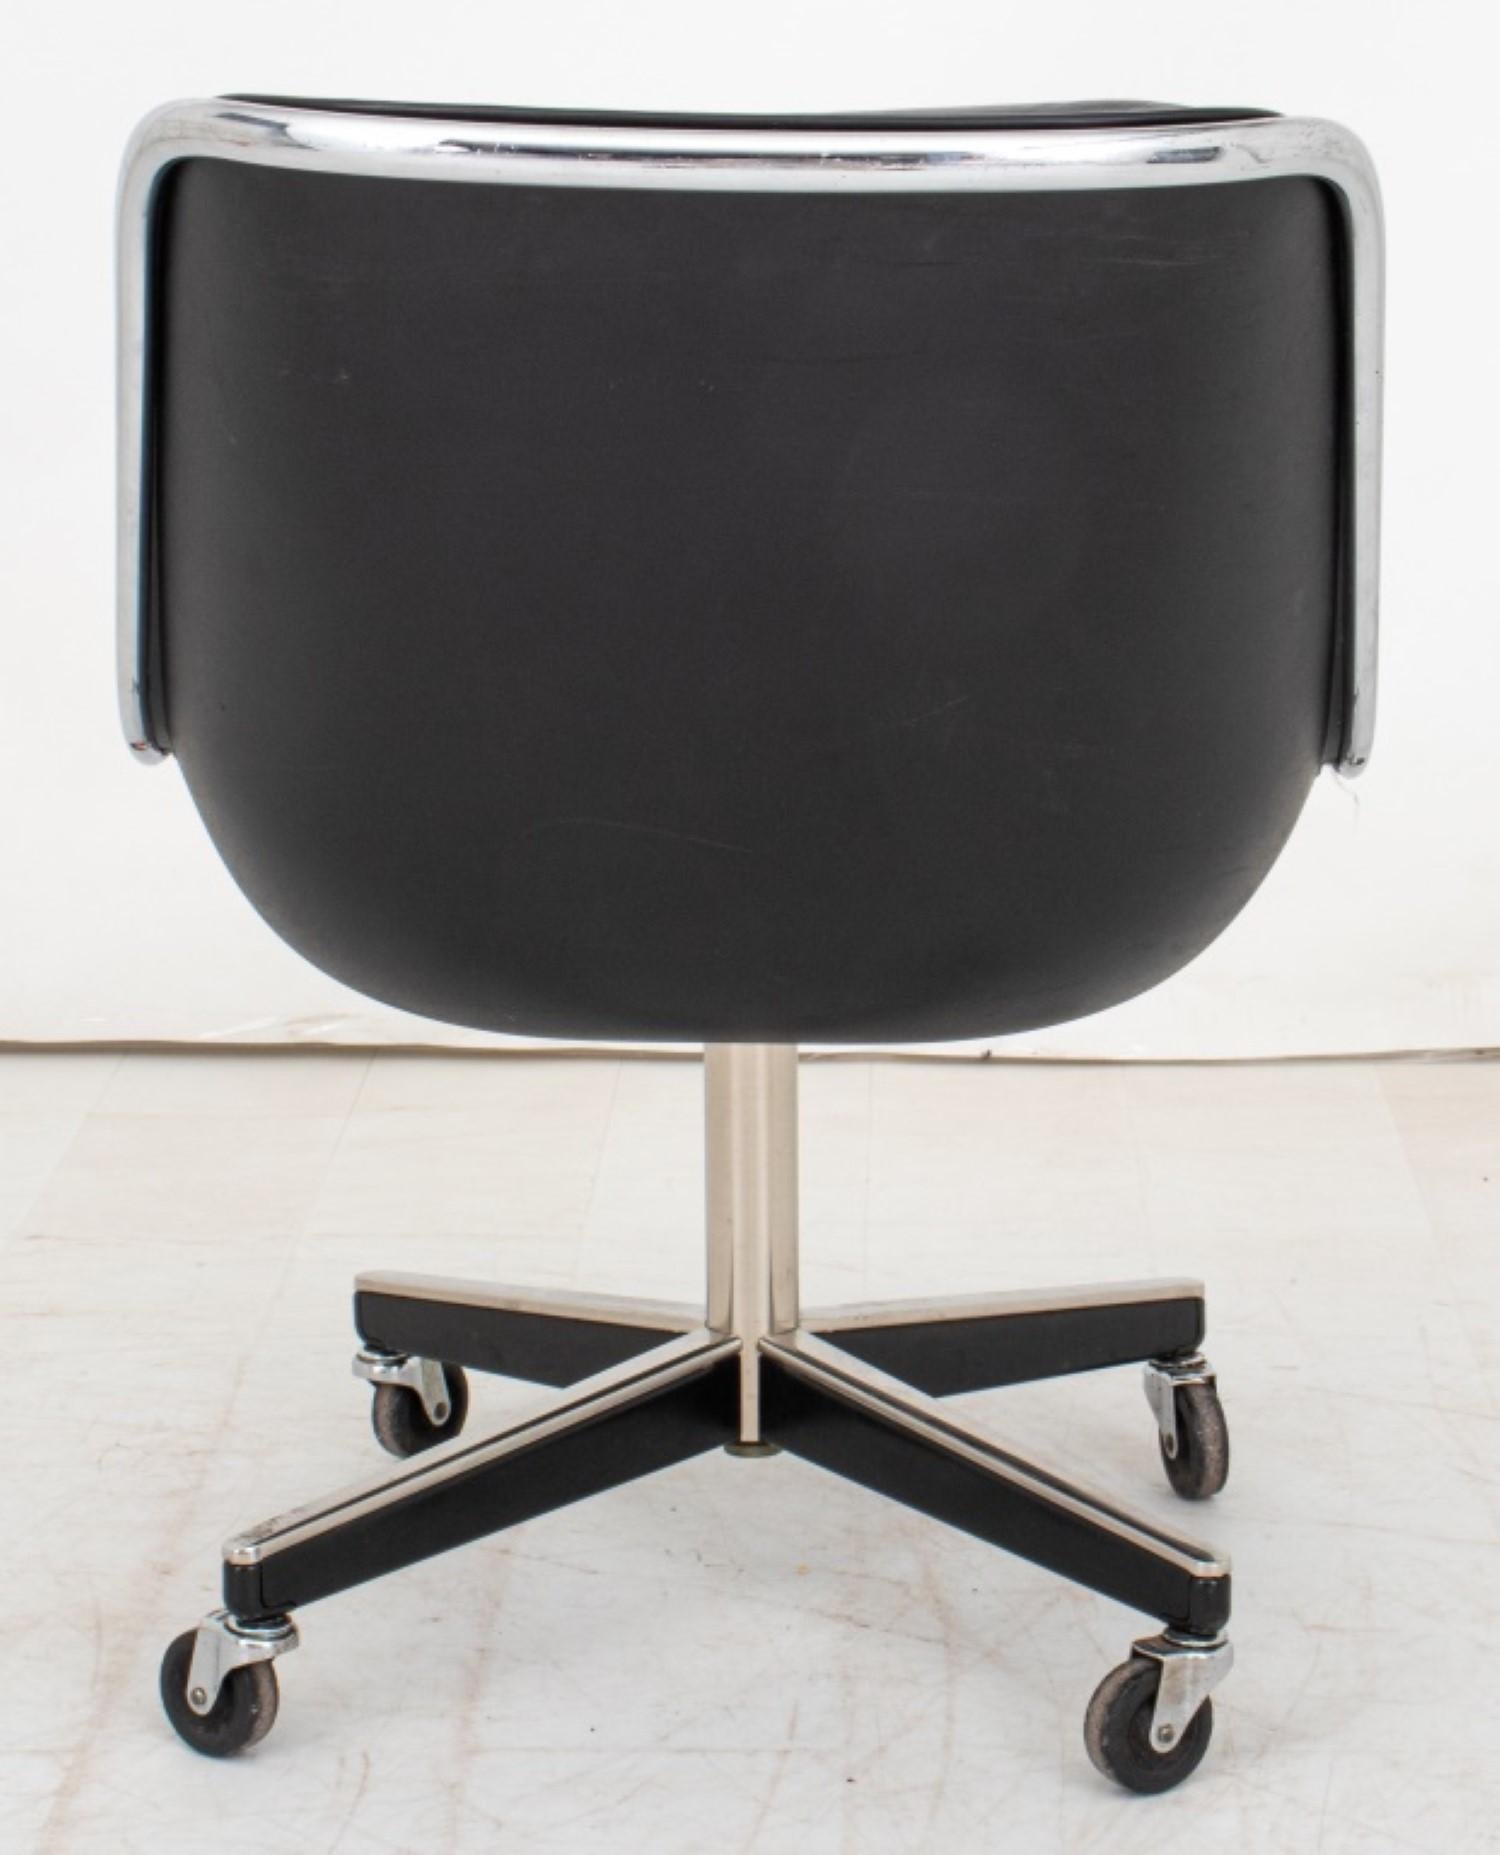 Charles Pollock Executive Office Chair for Knoll International (1963)

Design: Button-tufted black leather seat and backing on a chrome base with four casters.

Dimensions: 32.25